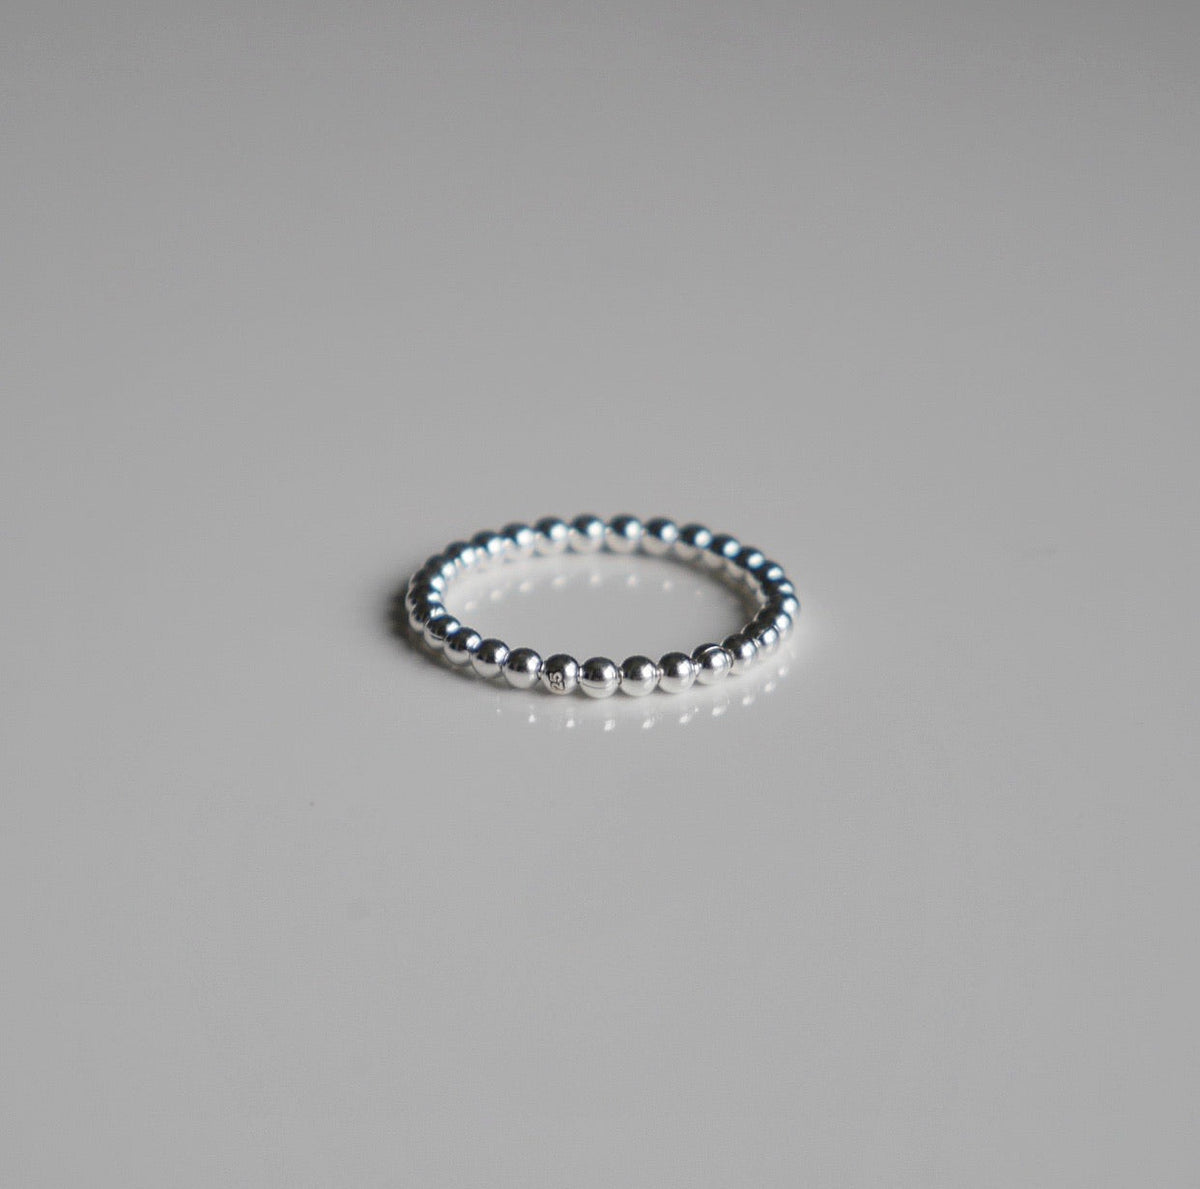 Daily Travel Ring .925 sterling silver